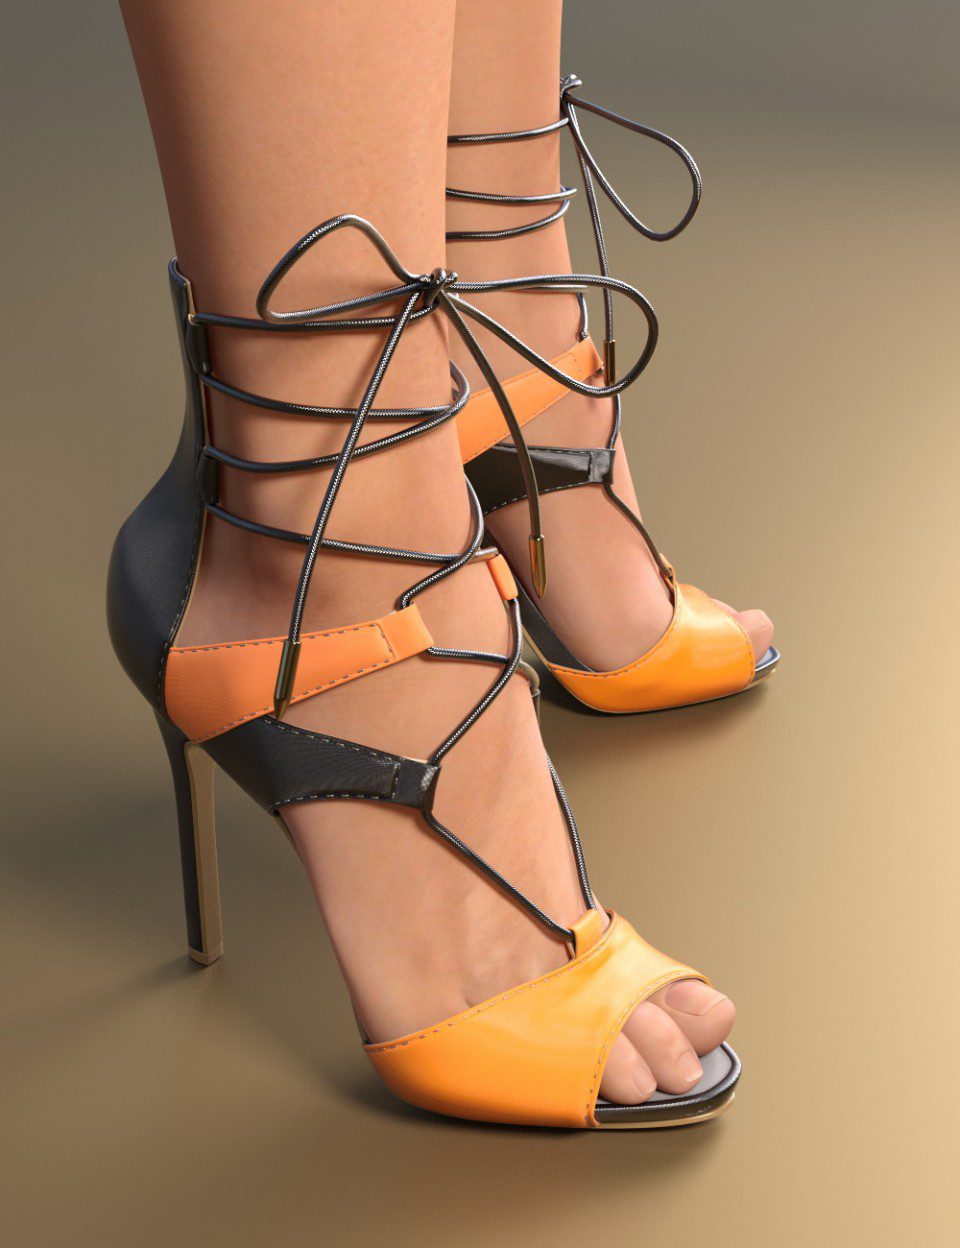 Lace Up Heels for Genesis 3 Female(s)_DAZ3D下载站